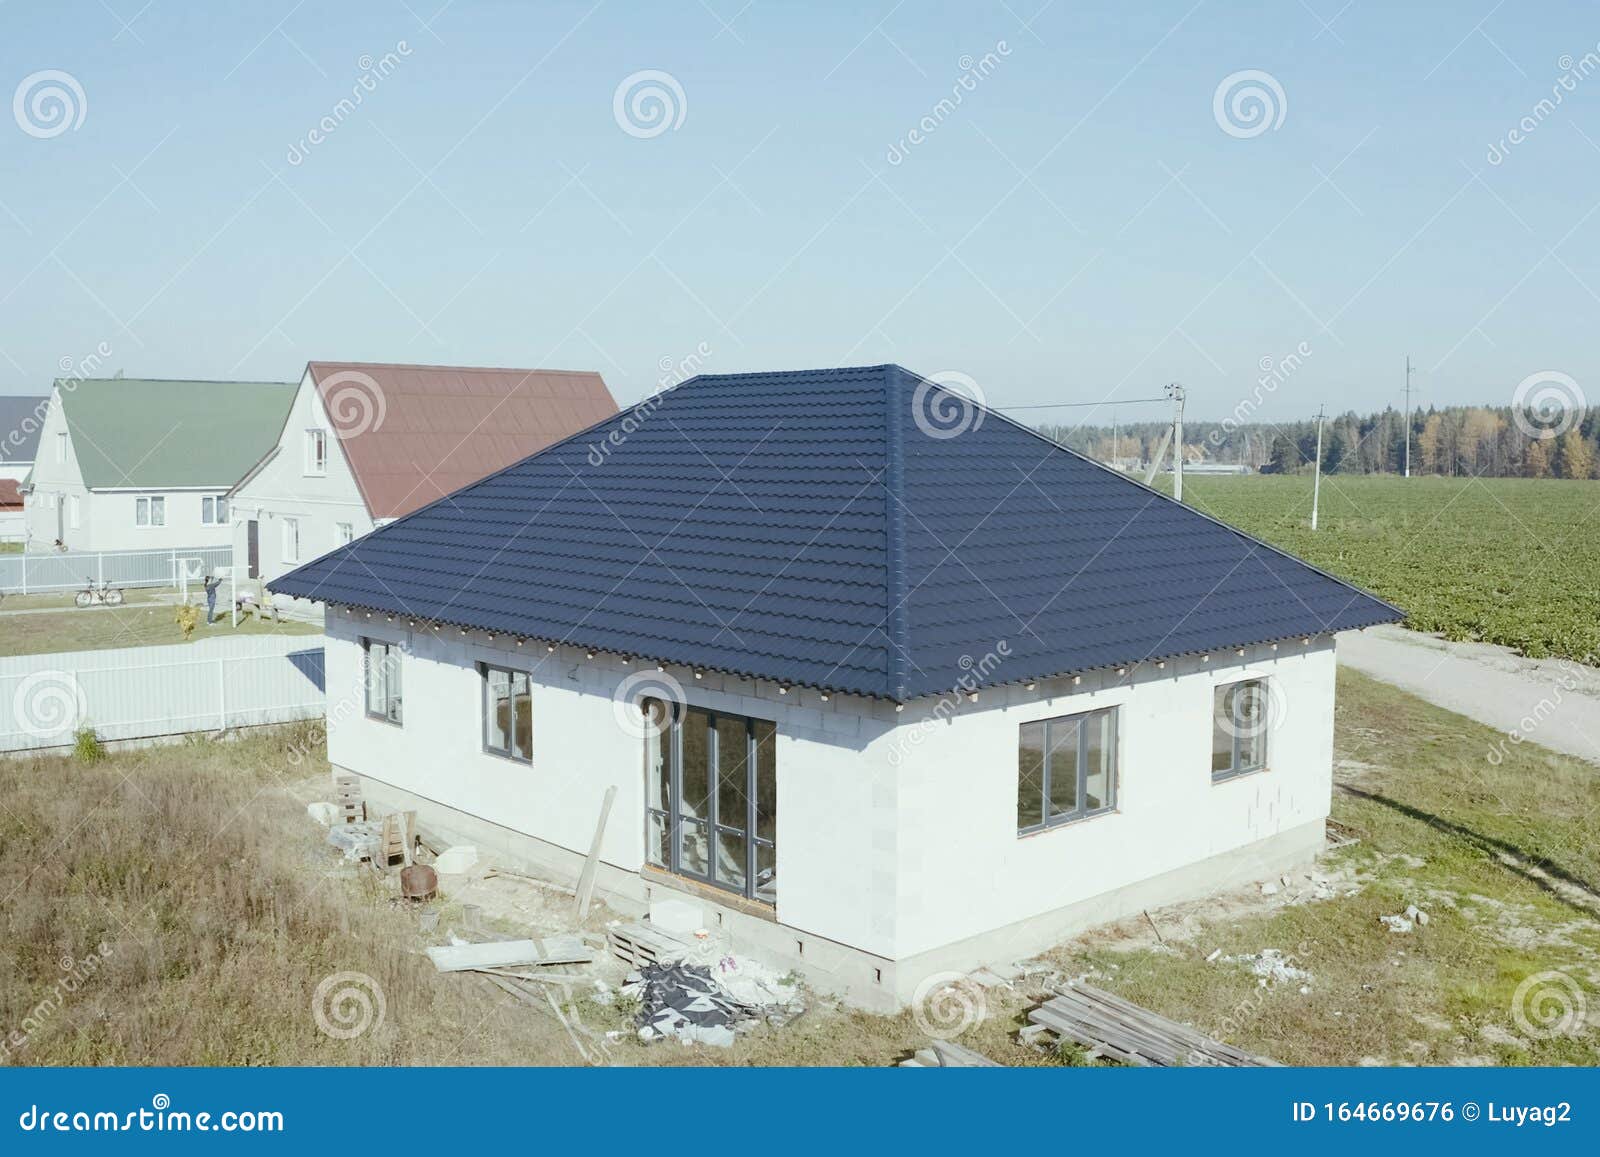 Corrugated Metal Roof And Metal Roofing Modern Roof Made 